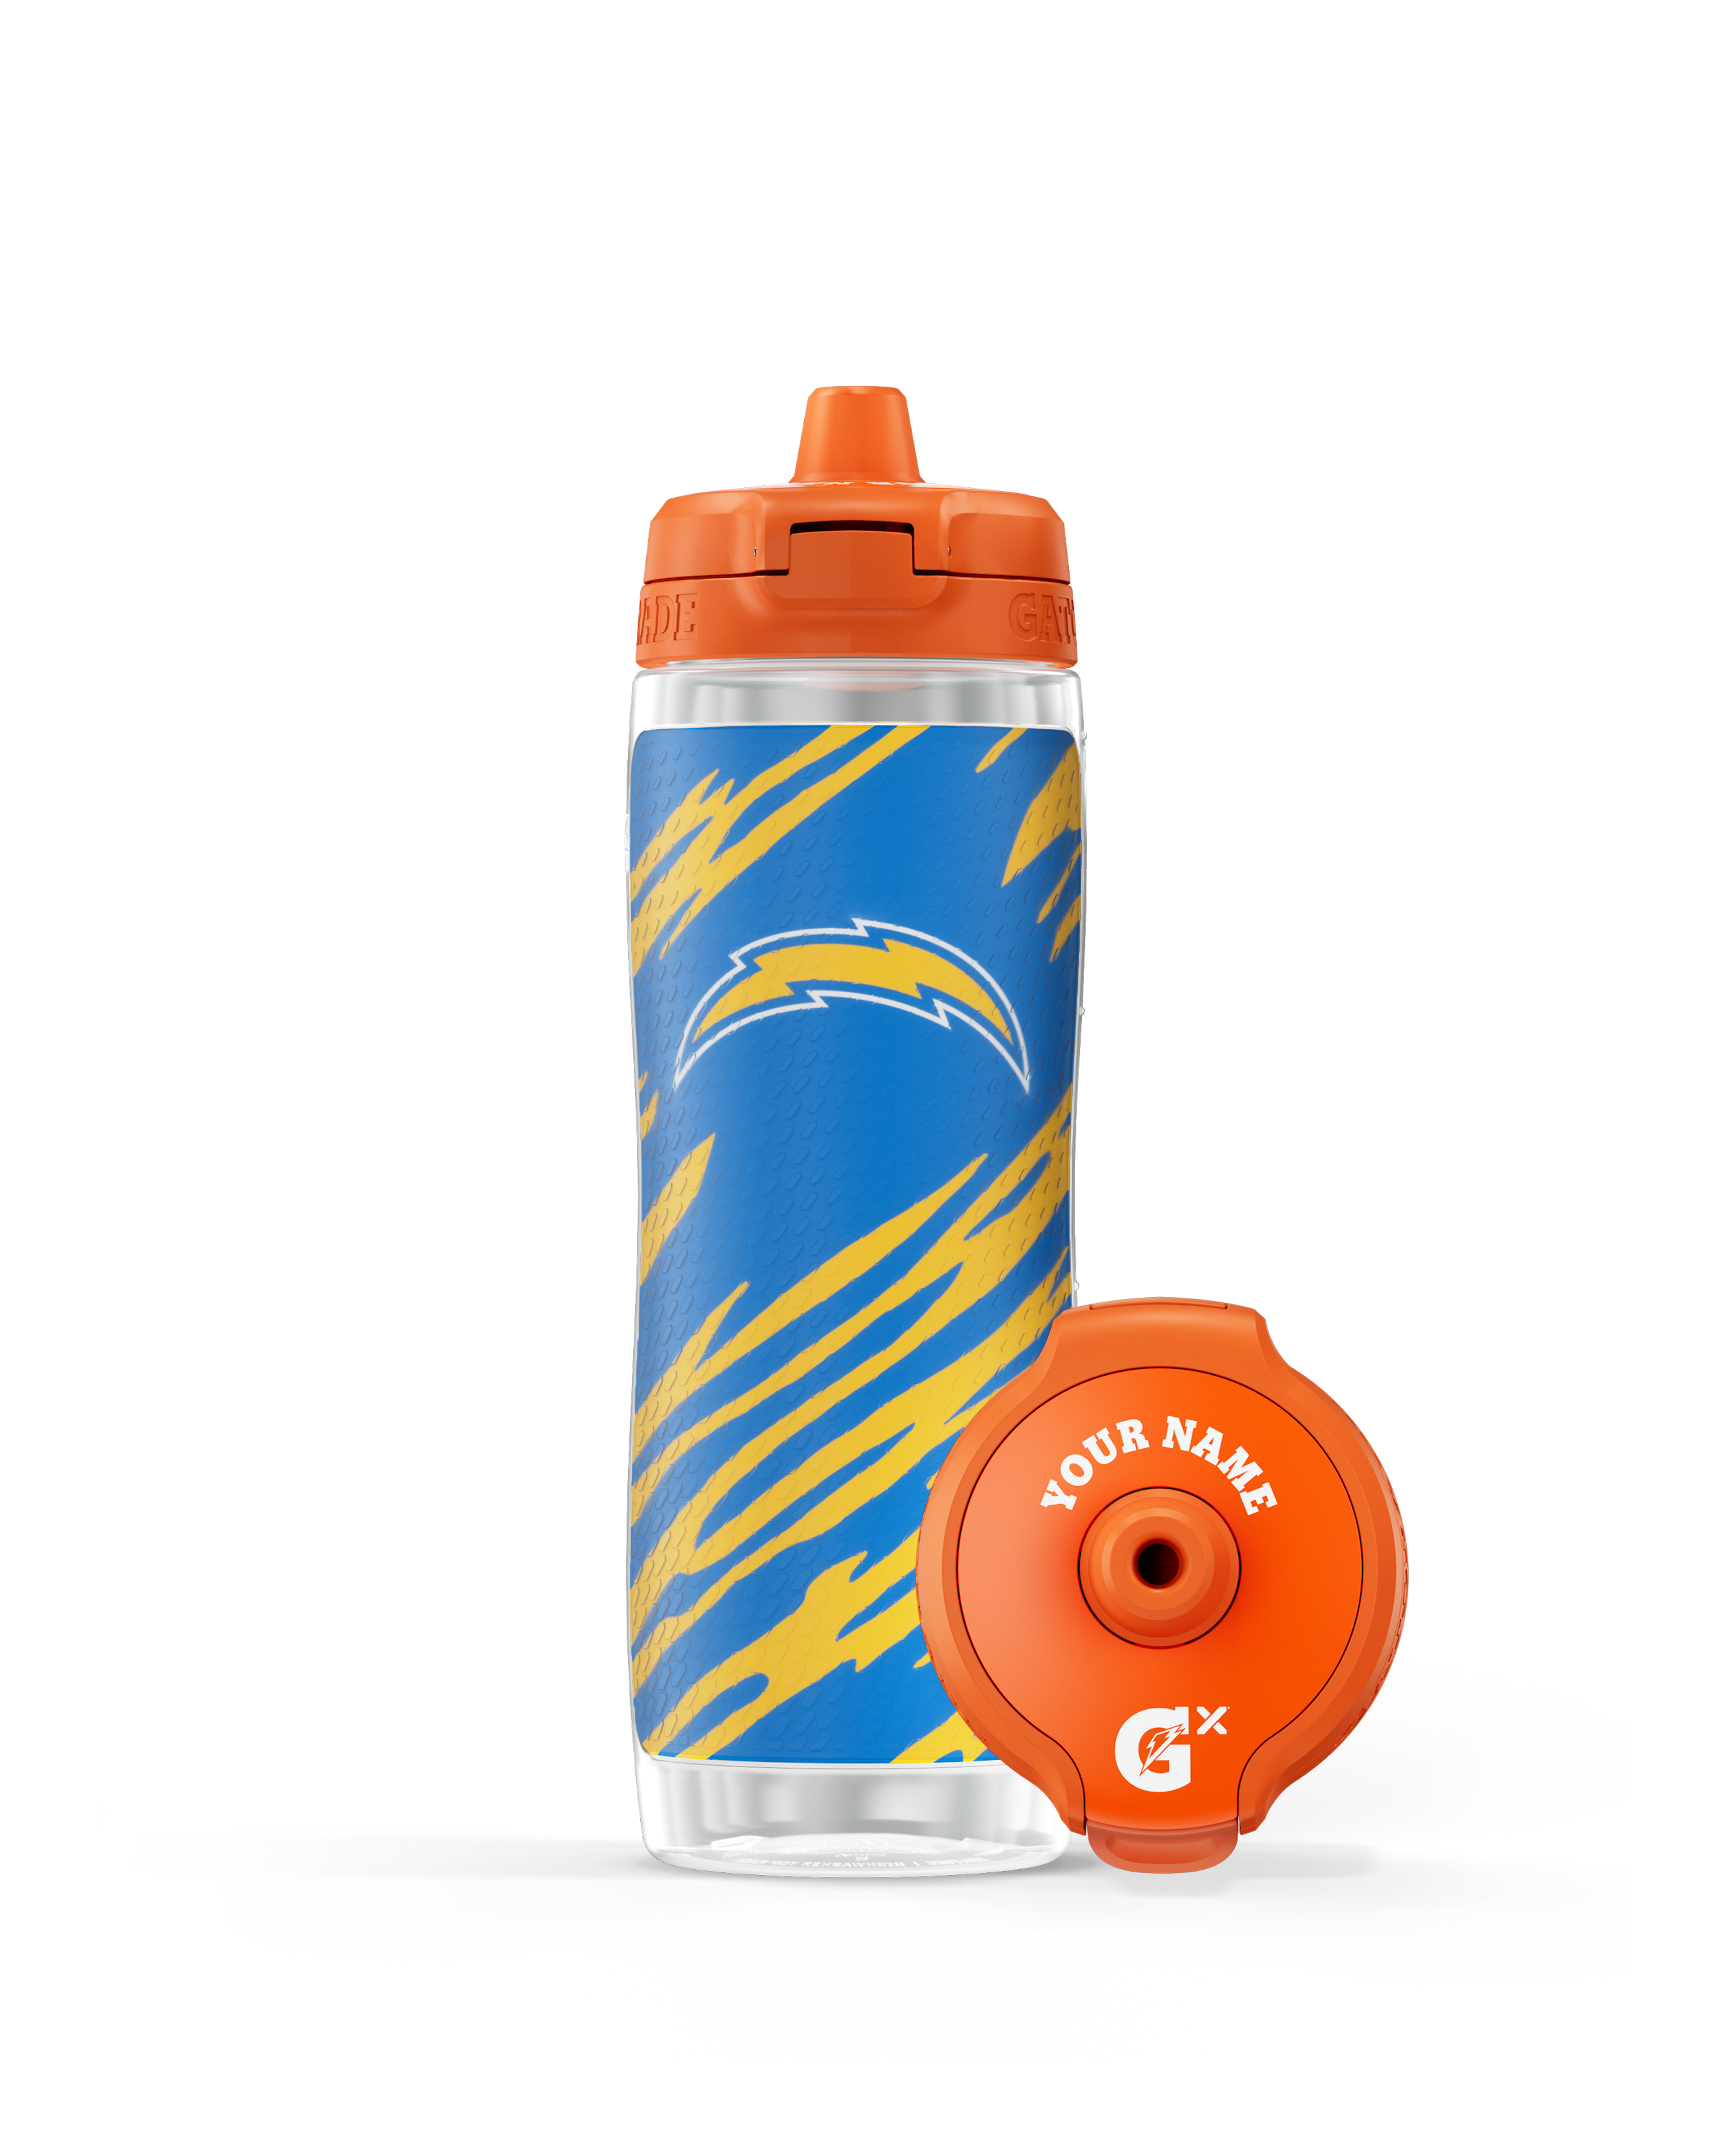 Los Angeles Chargers NFL Bottle